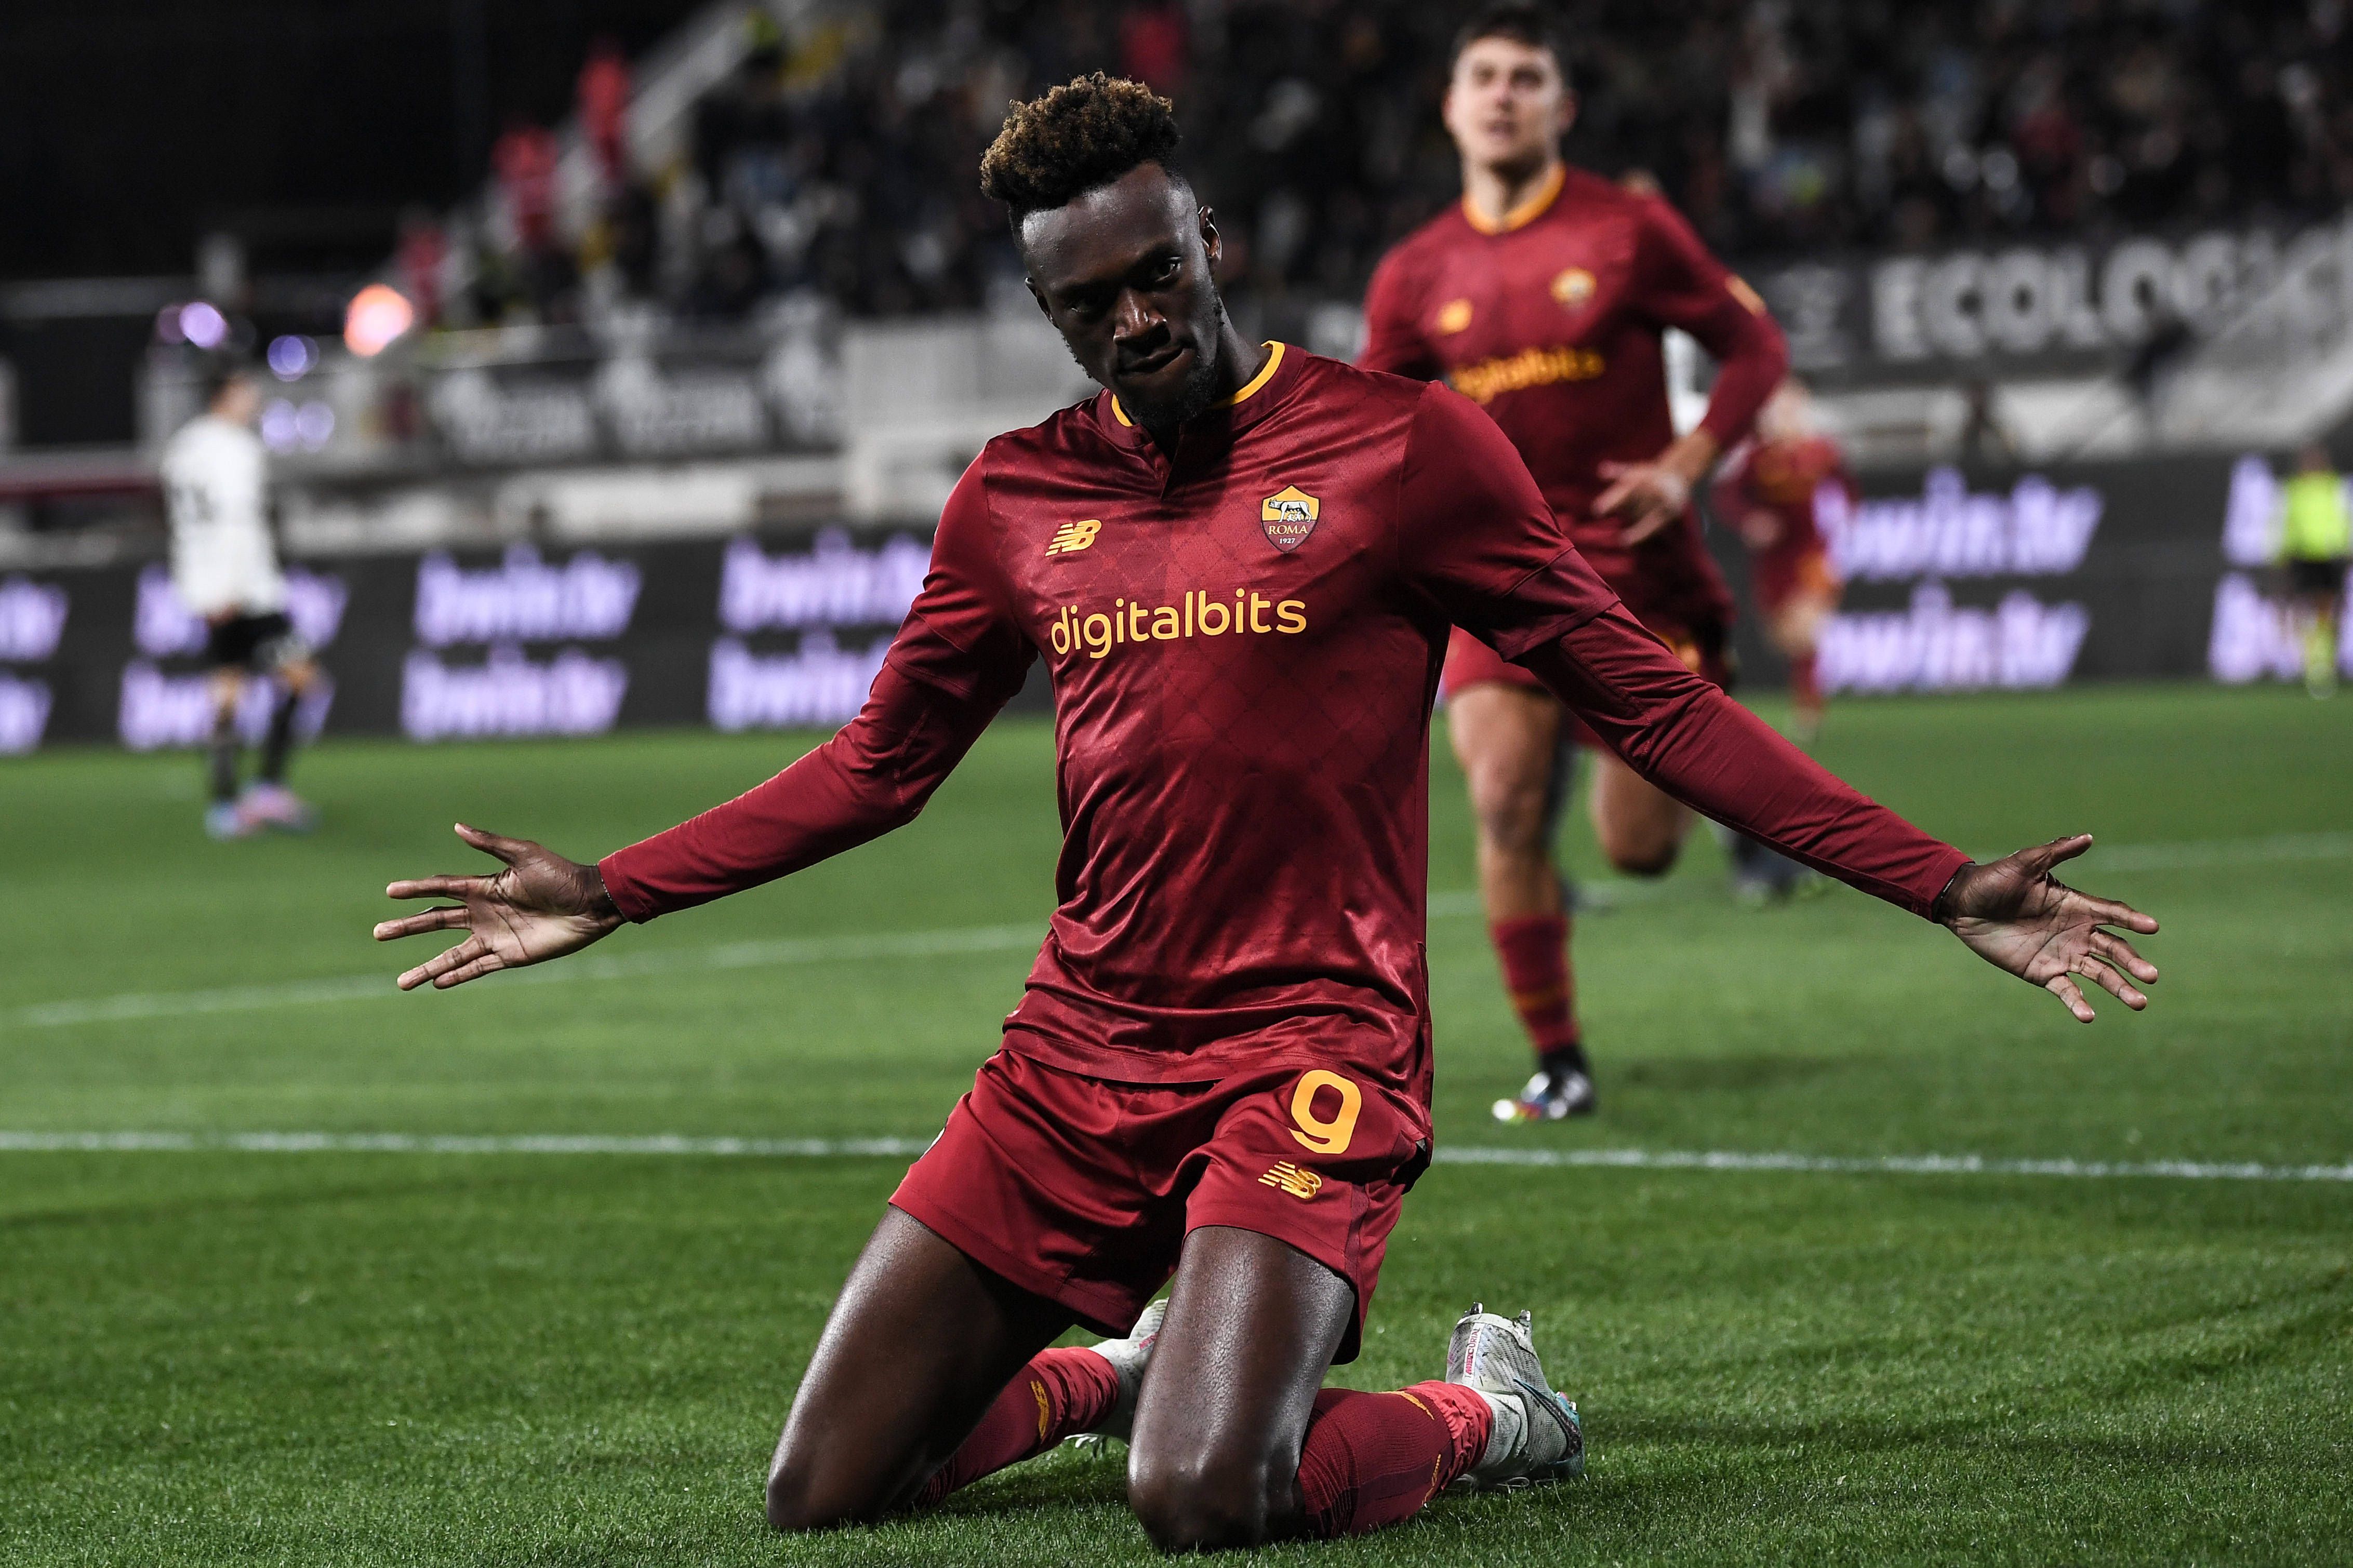 Tammy Abraham draws interest from Milan and Premier League clubs